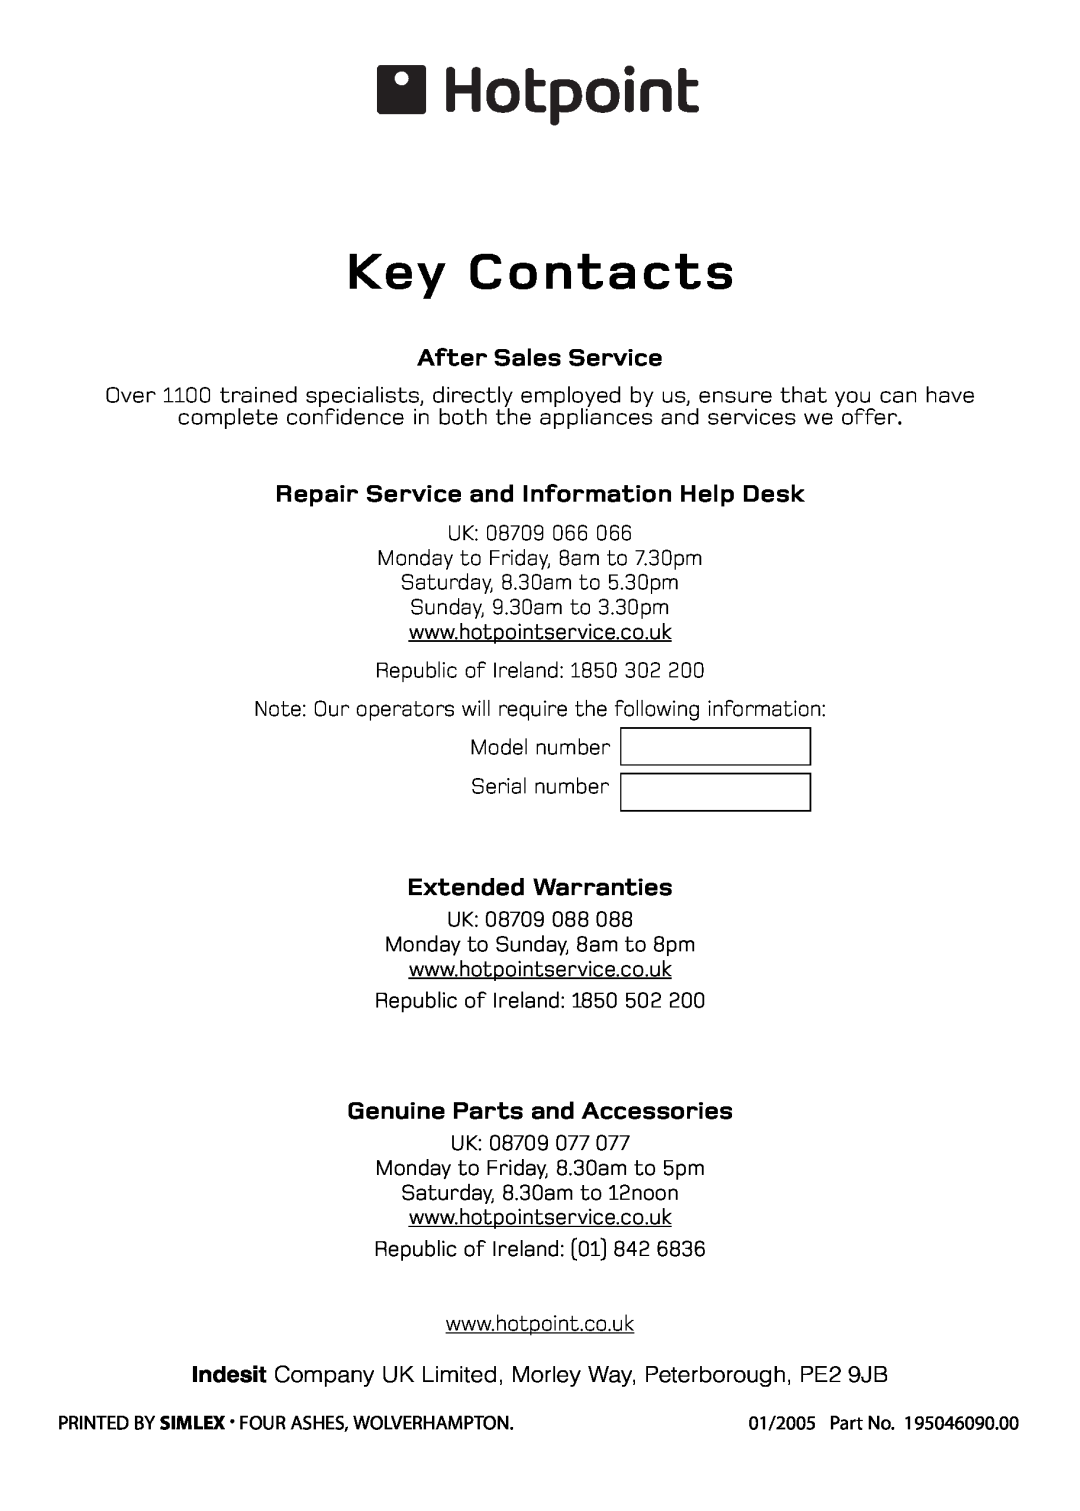 Hotpoint S130E manual Key Contacts, After Sales Service, Repair Service and Information Help Desk, Extended Warranties 